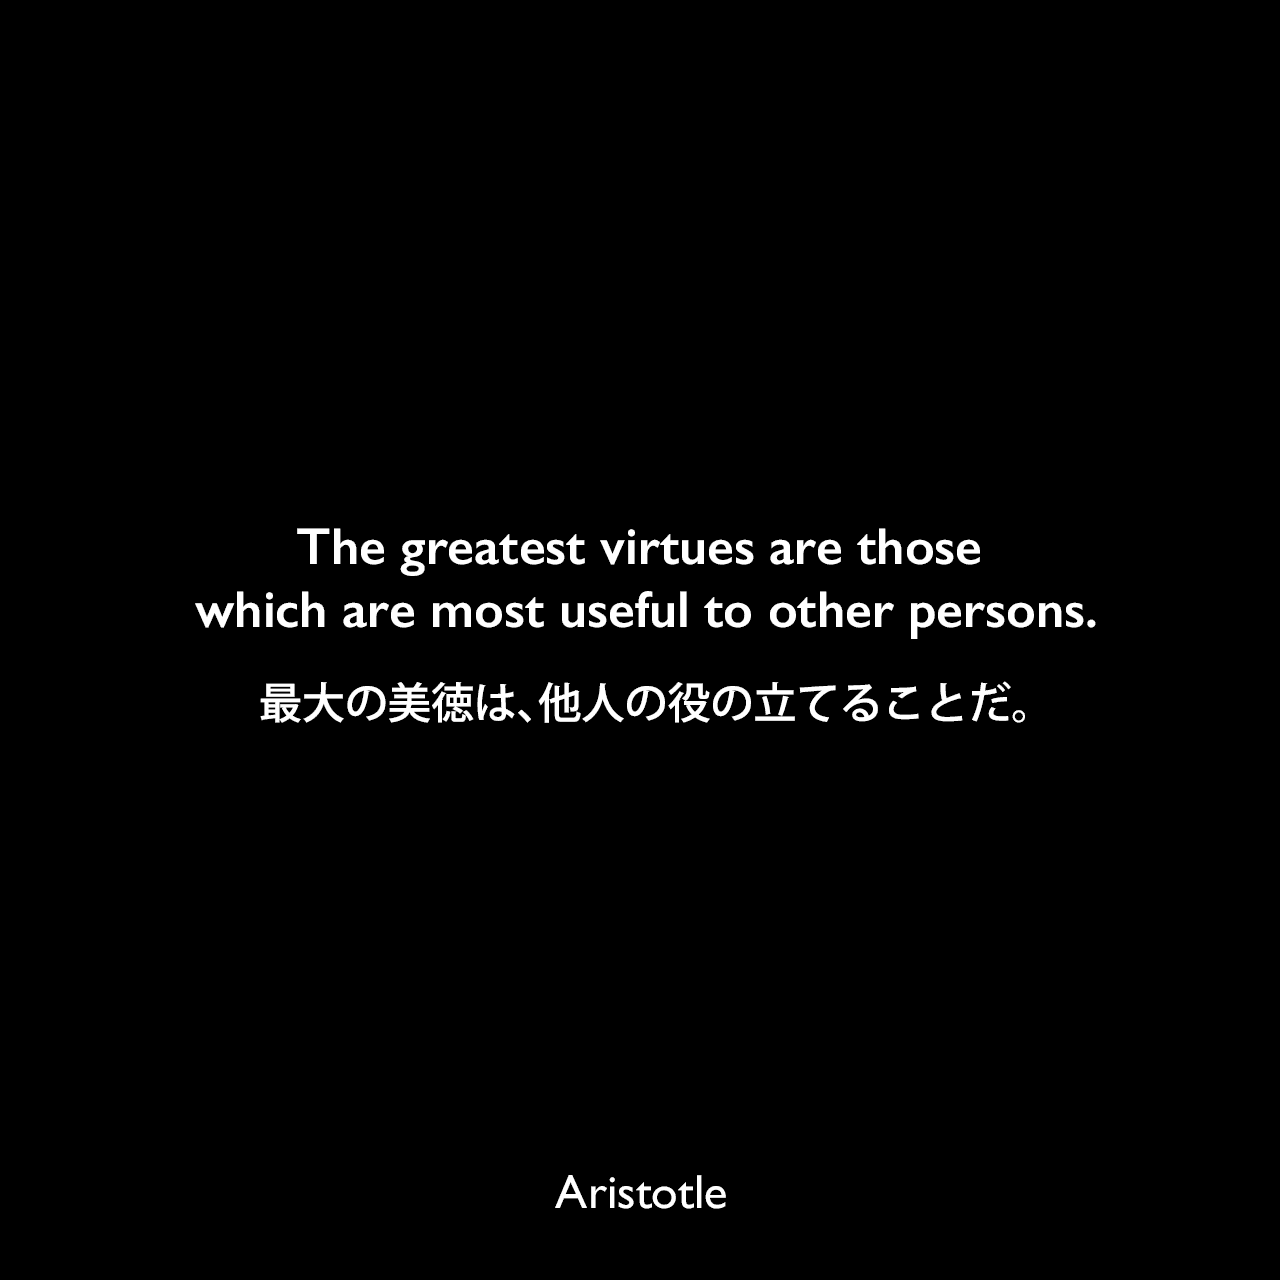 The greatest virtues are those which are most useful to other persons.最大の美徳は、他人の役の立てることだ。Aristotle